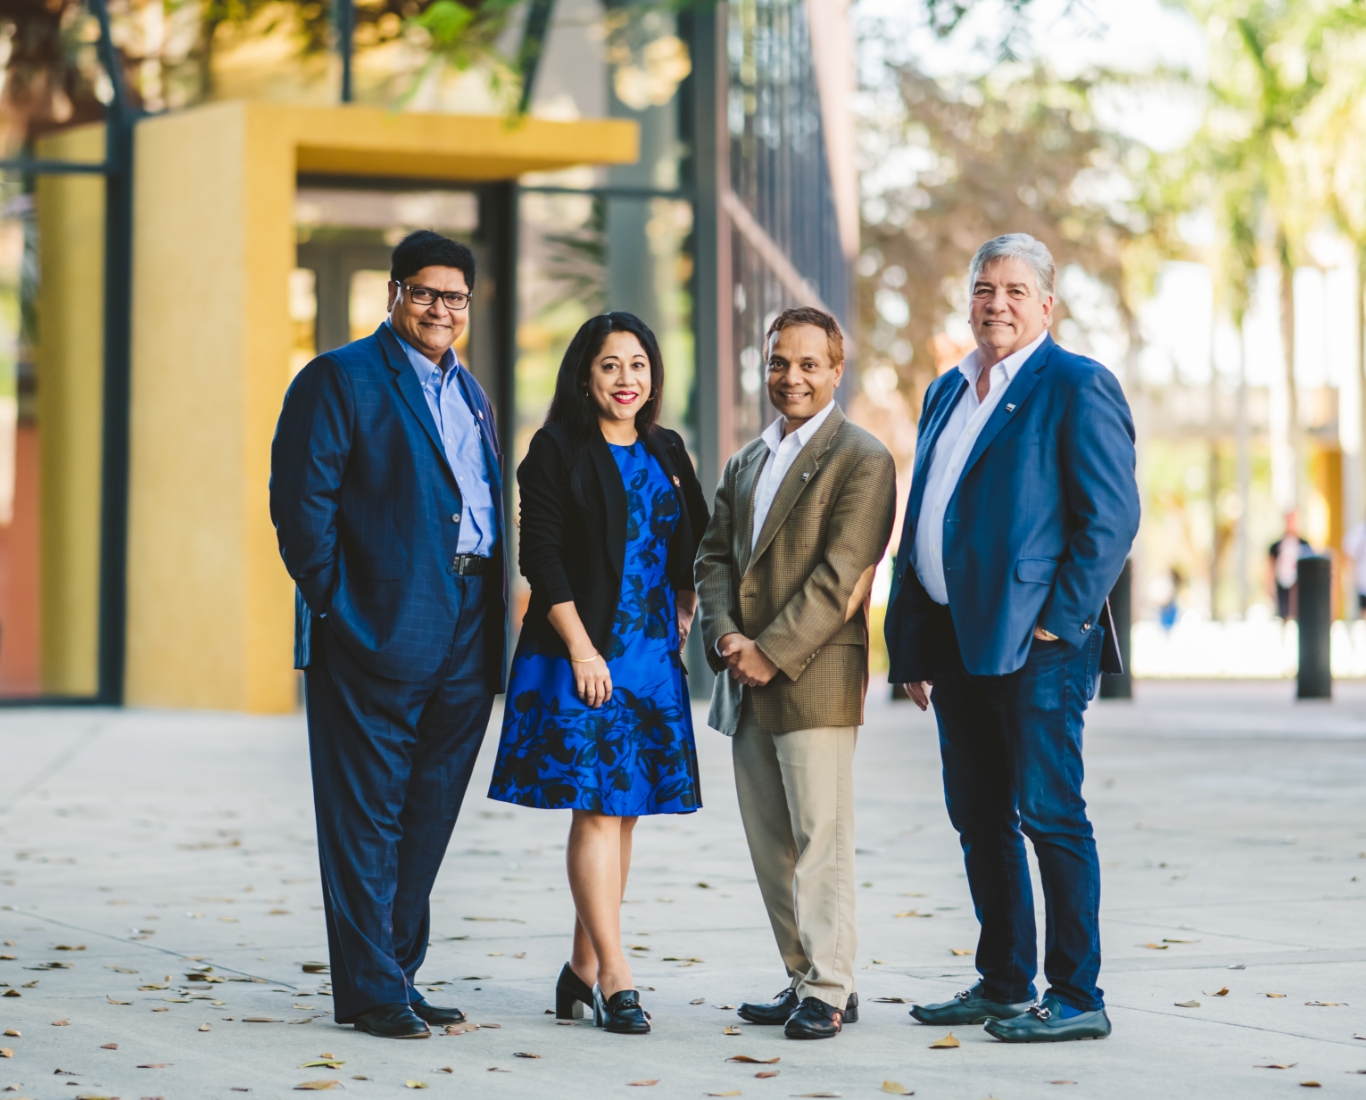 Faculty members from FIU Business